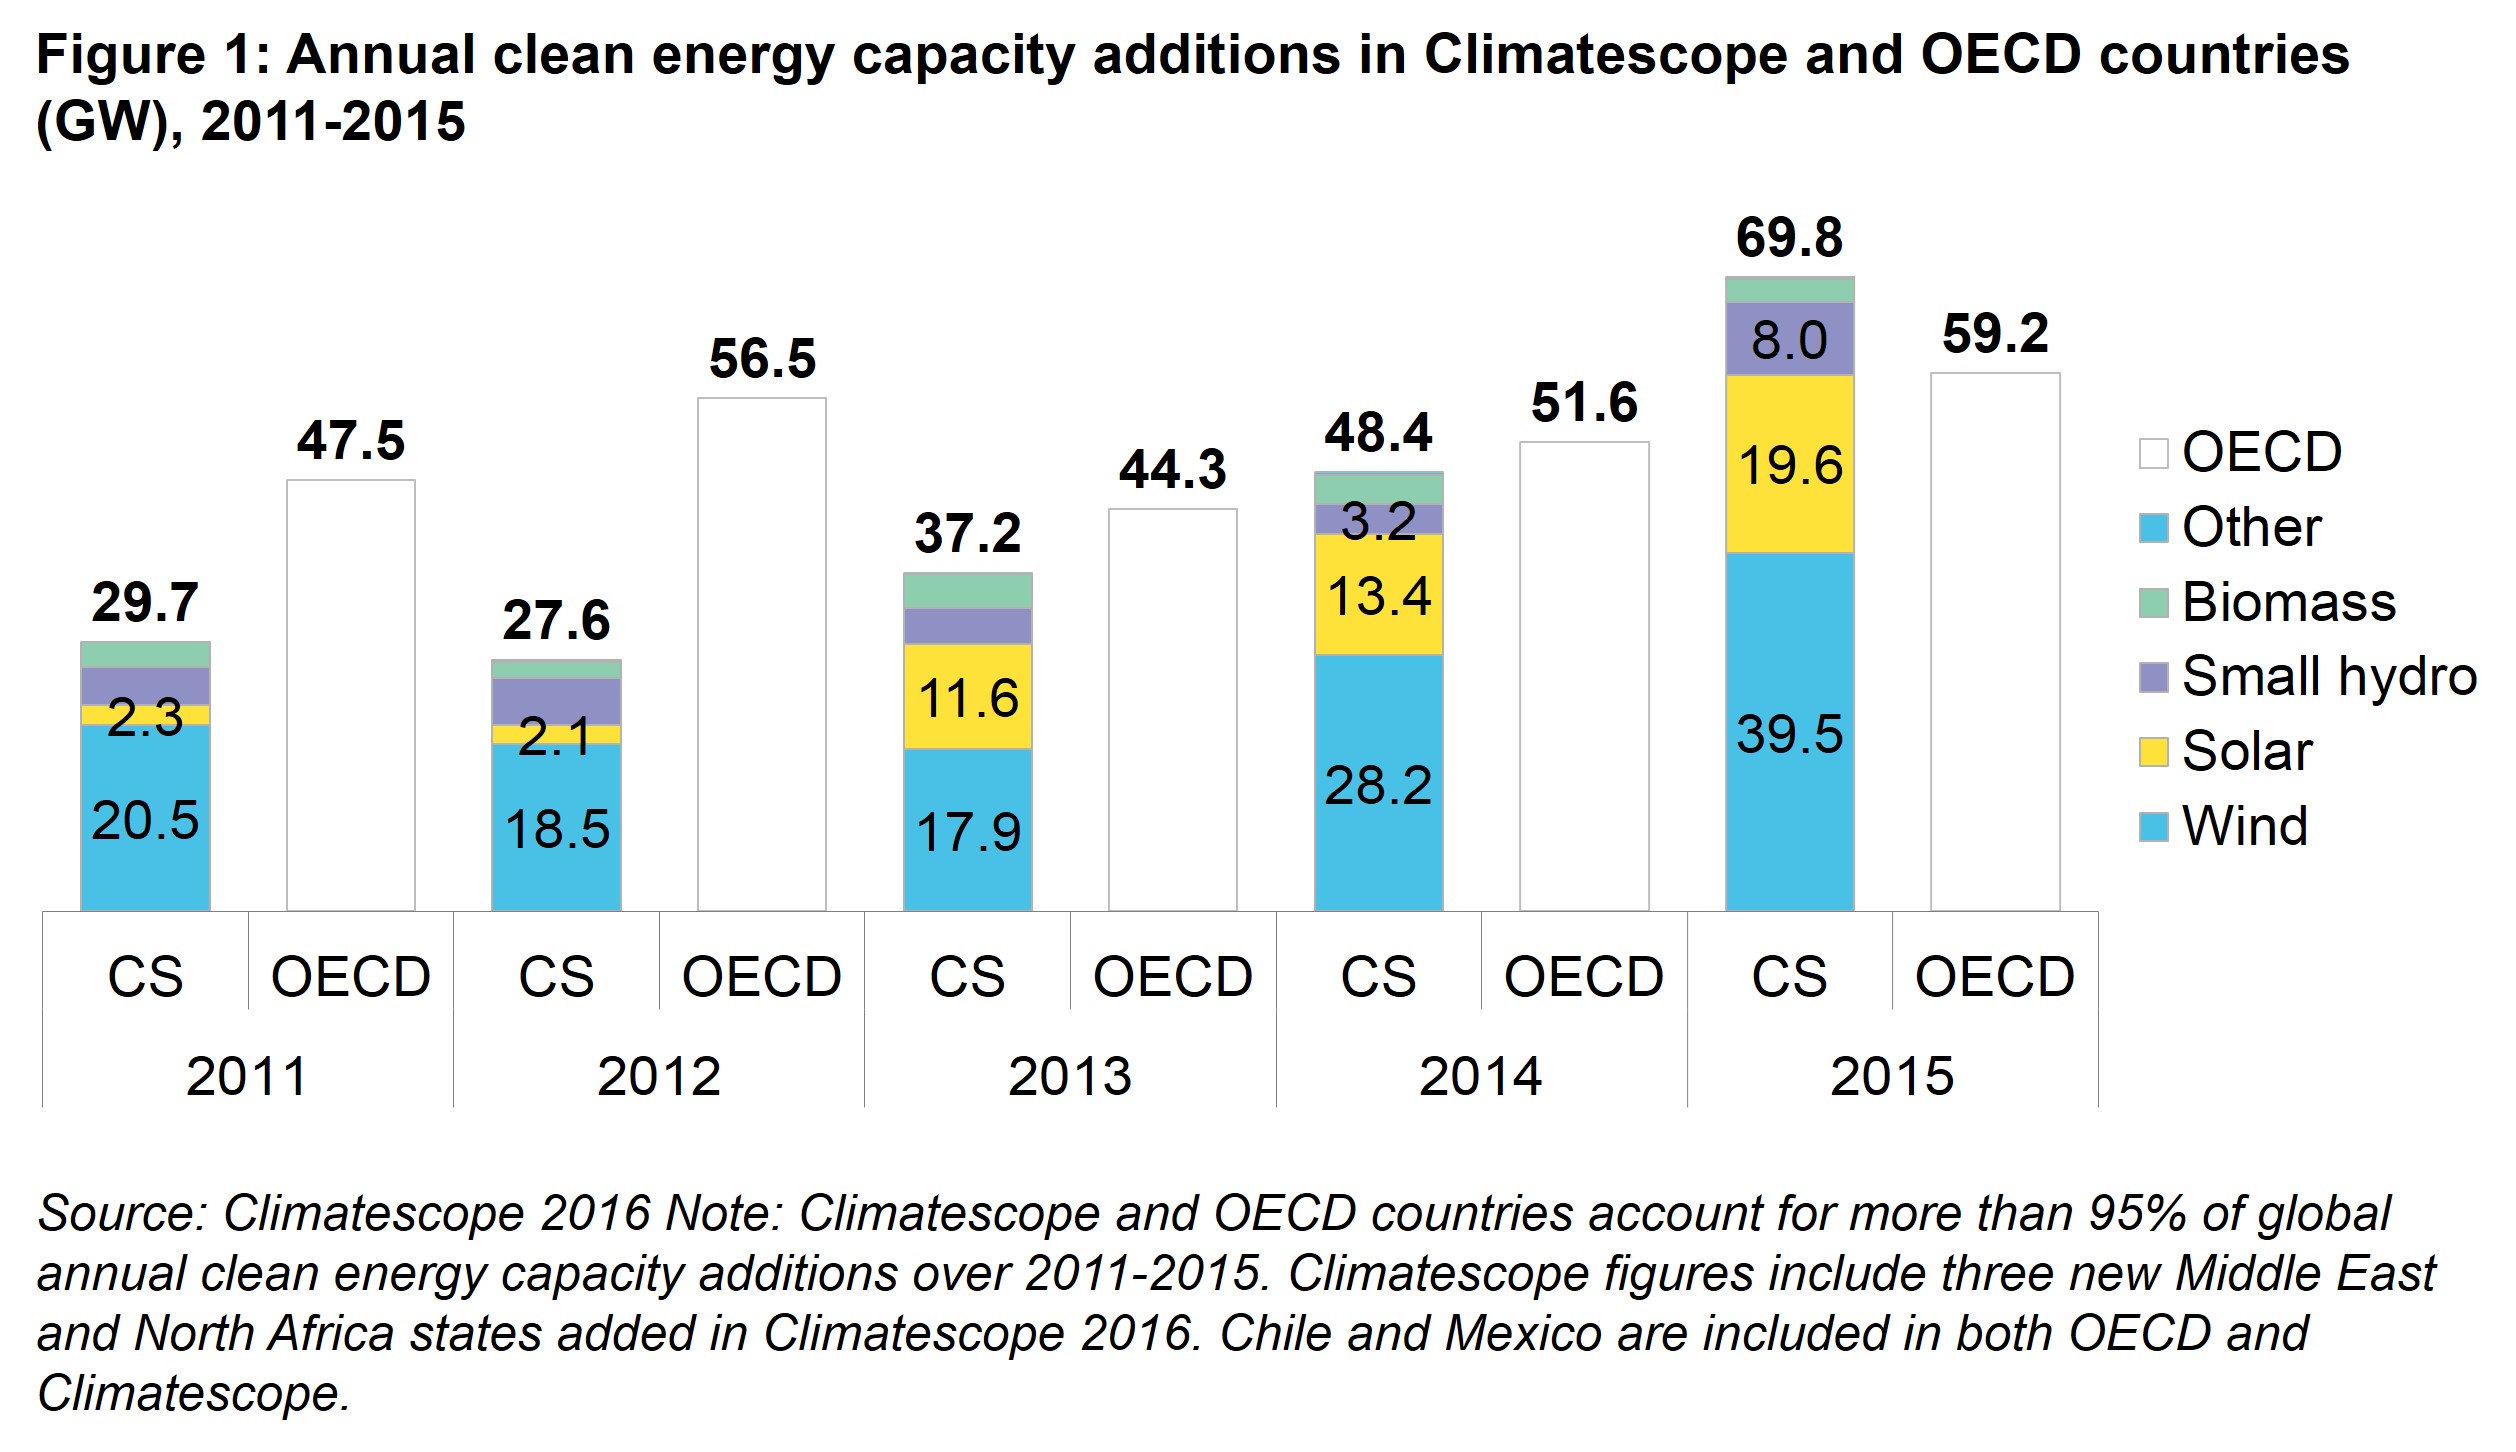 Executive Summary Fig 1 - Annual clean energy capacity additions in Climatescope and OECD countries (GW), 2011-2015